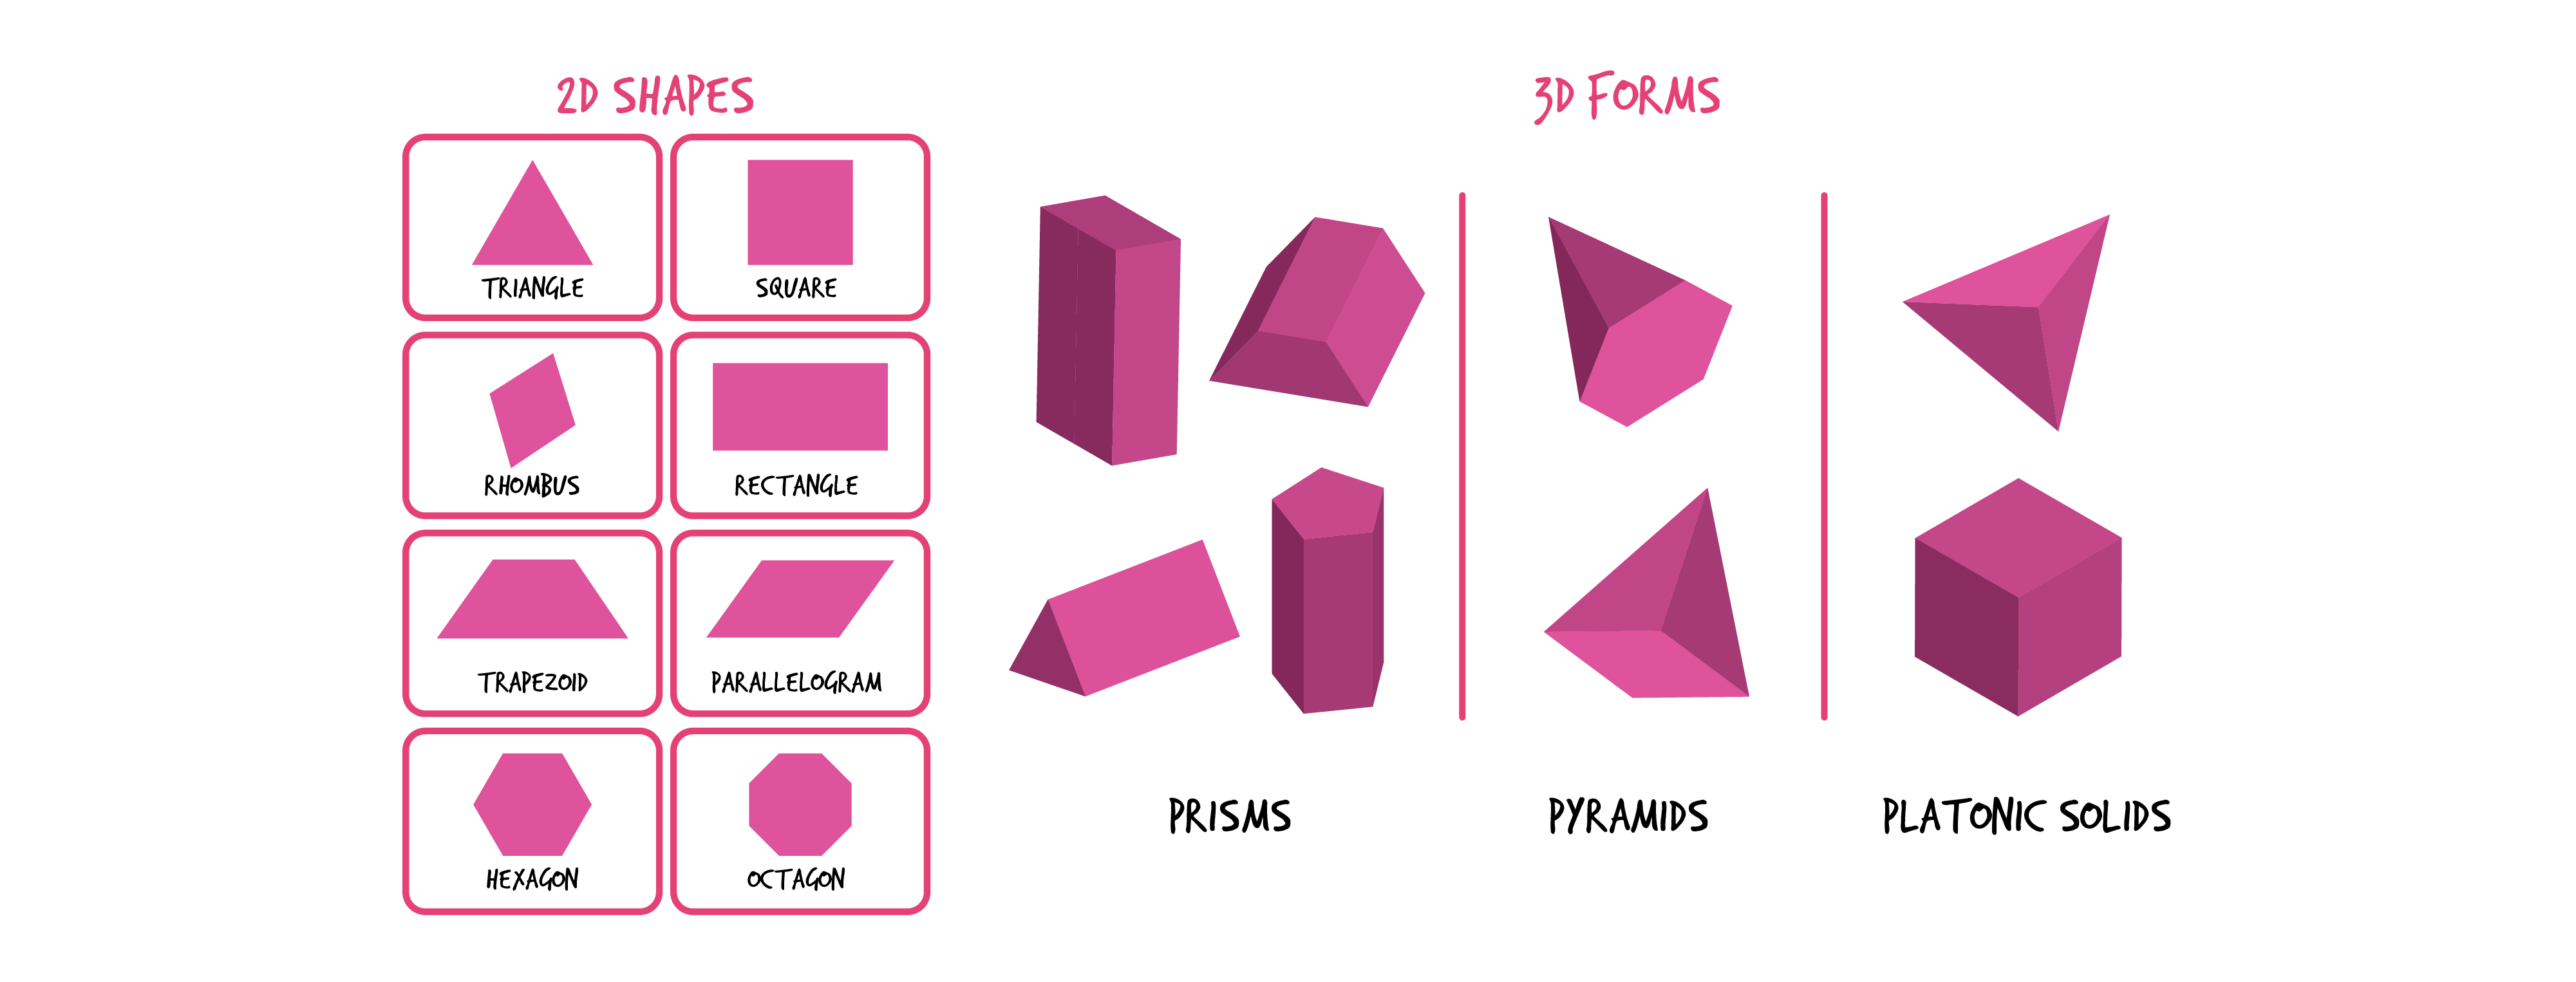 This image contains two main sections: on the left are examples of two-dimensional shapes and on the right are examples of three-dimensional forms, all in magenta. All shapes and forms are titled accordingly on the image. The two-dimensional shapes, in reading order from left to right: triangle, square, rhombus, rectangle, trapezoid, parallelogram, hexagon, and octagon. The three-dimensional forms on the right are broken down into 3 subsections: prisms, pyramids, and platonic solids with several visual examples shown for each.